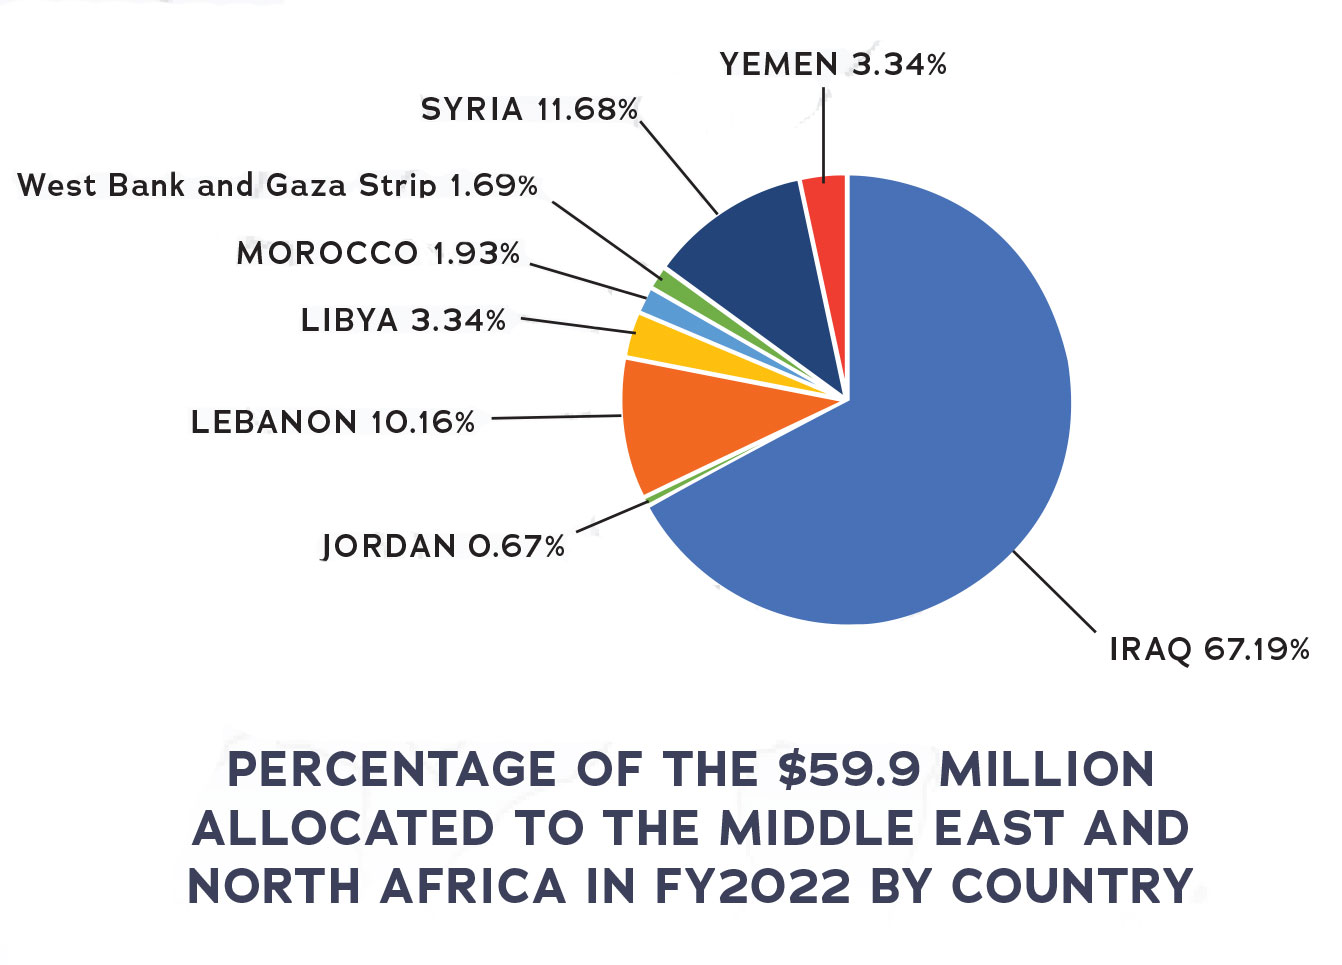 Percentage of the $59.9 Million Allocated to the Middle East and North Africa in FY2022 by Country, full text description in Appendix A